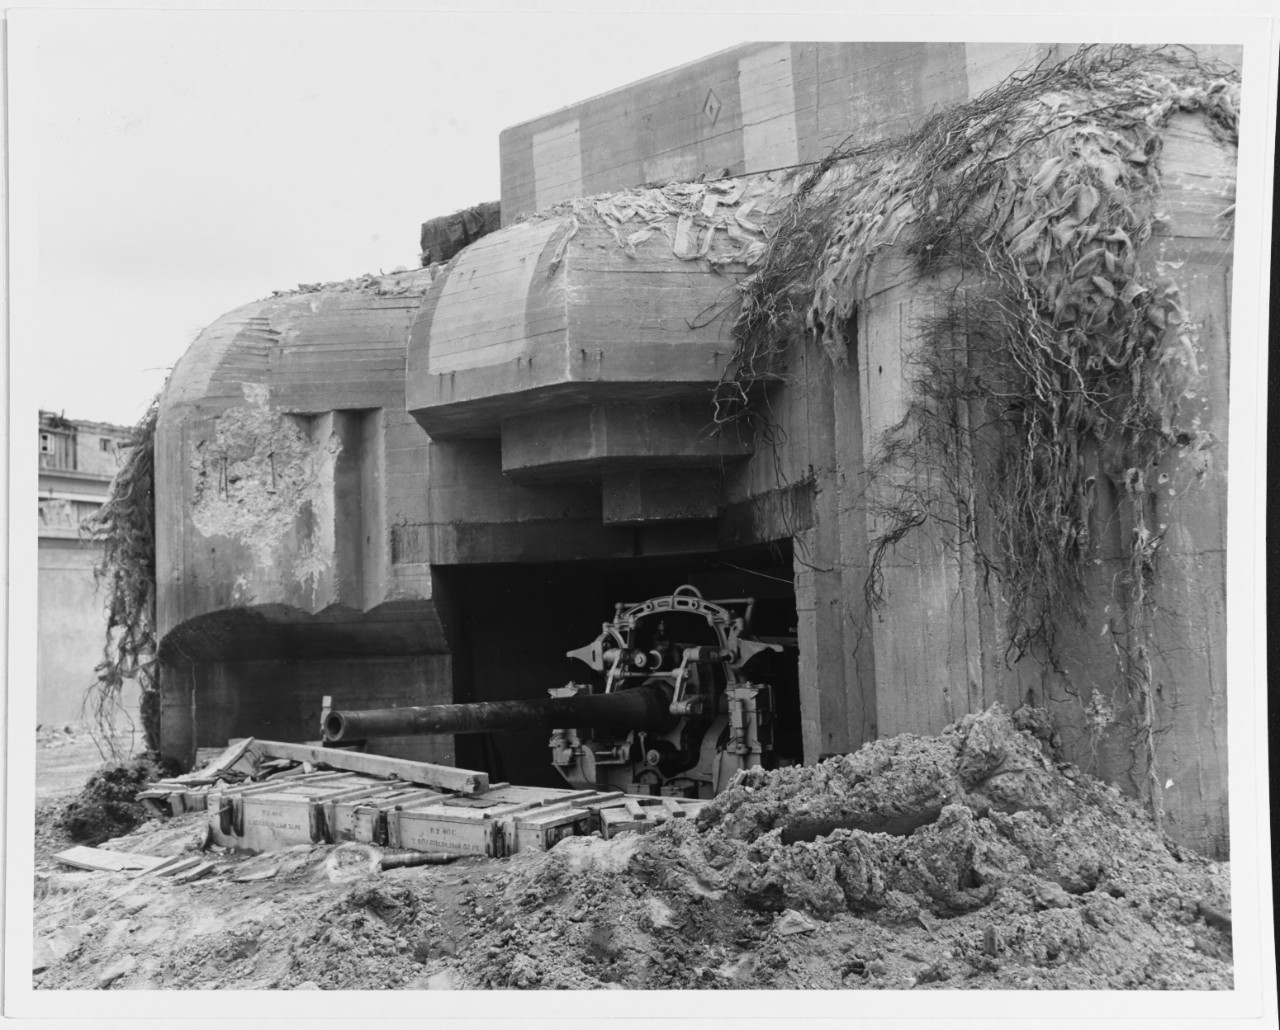 Photo #: 80-G-254307  Cherbourg Campaign, June 1944